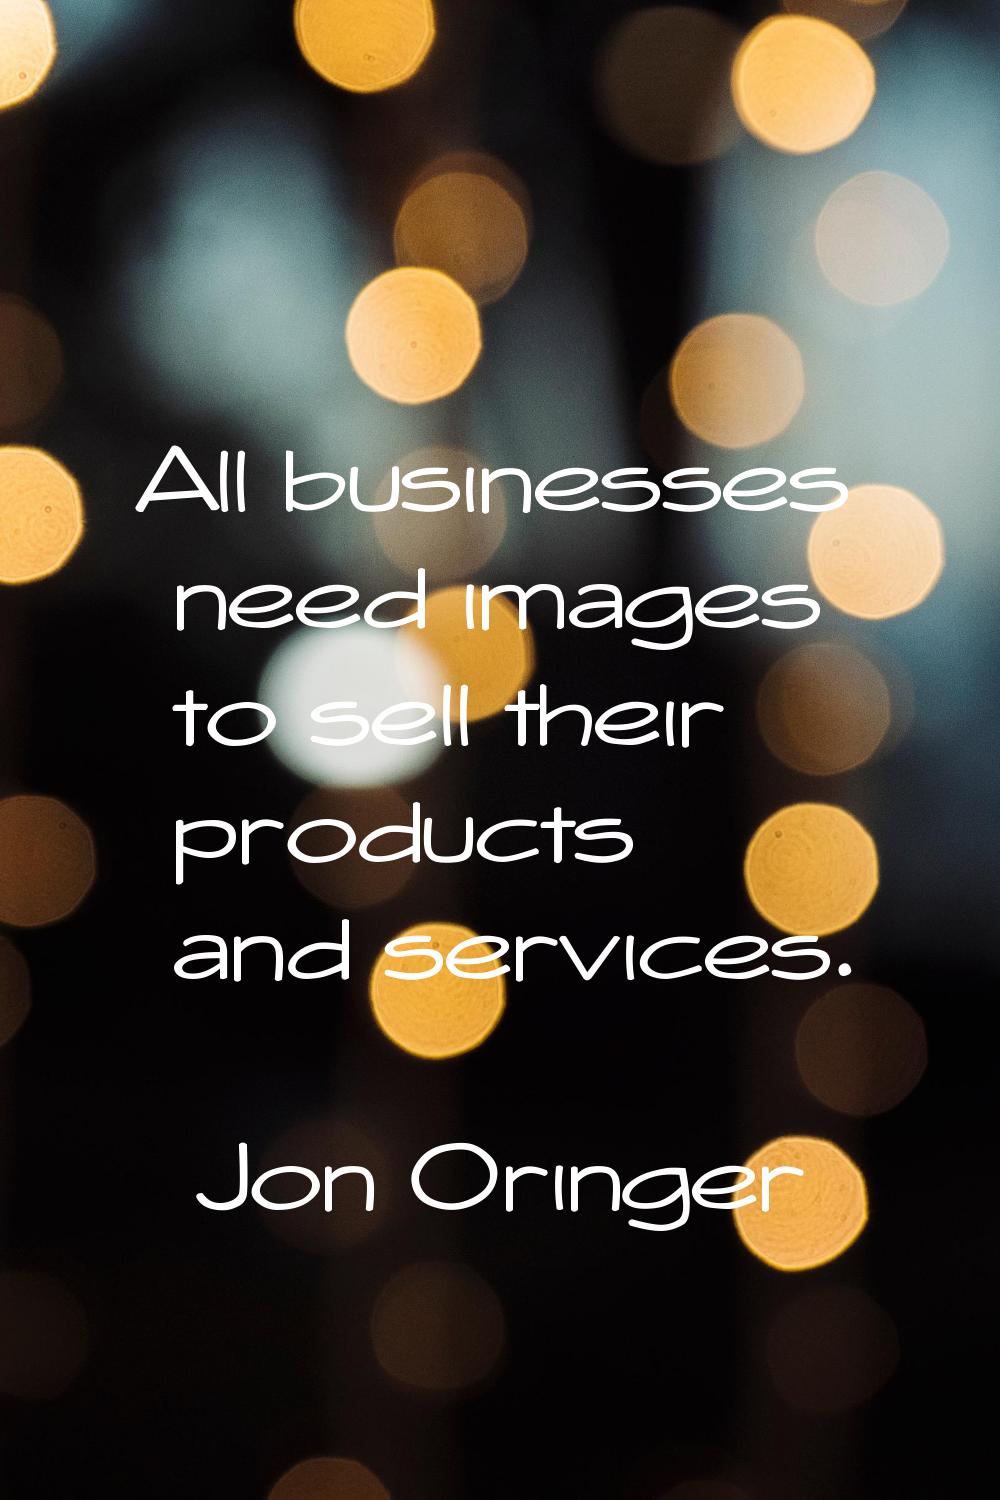 All businesses need images to sell their products and services.